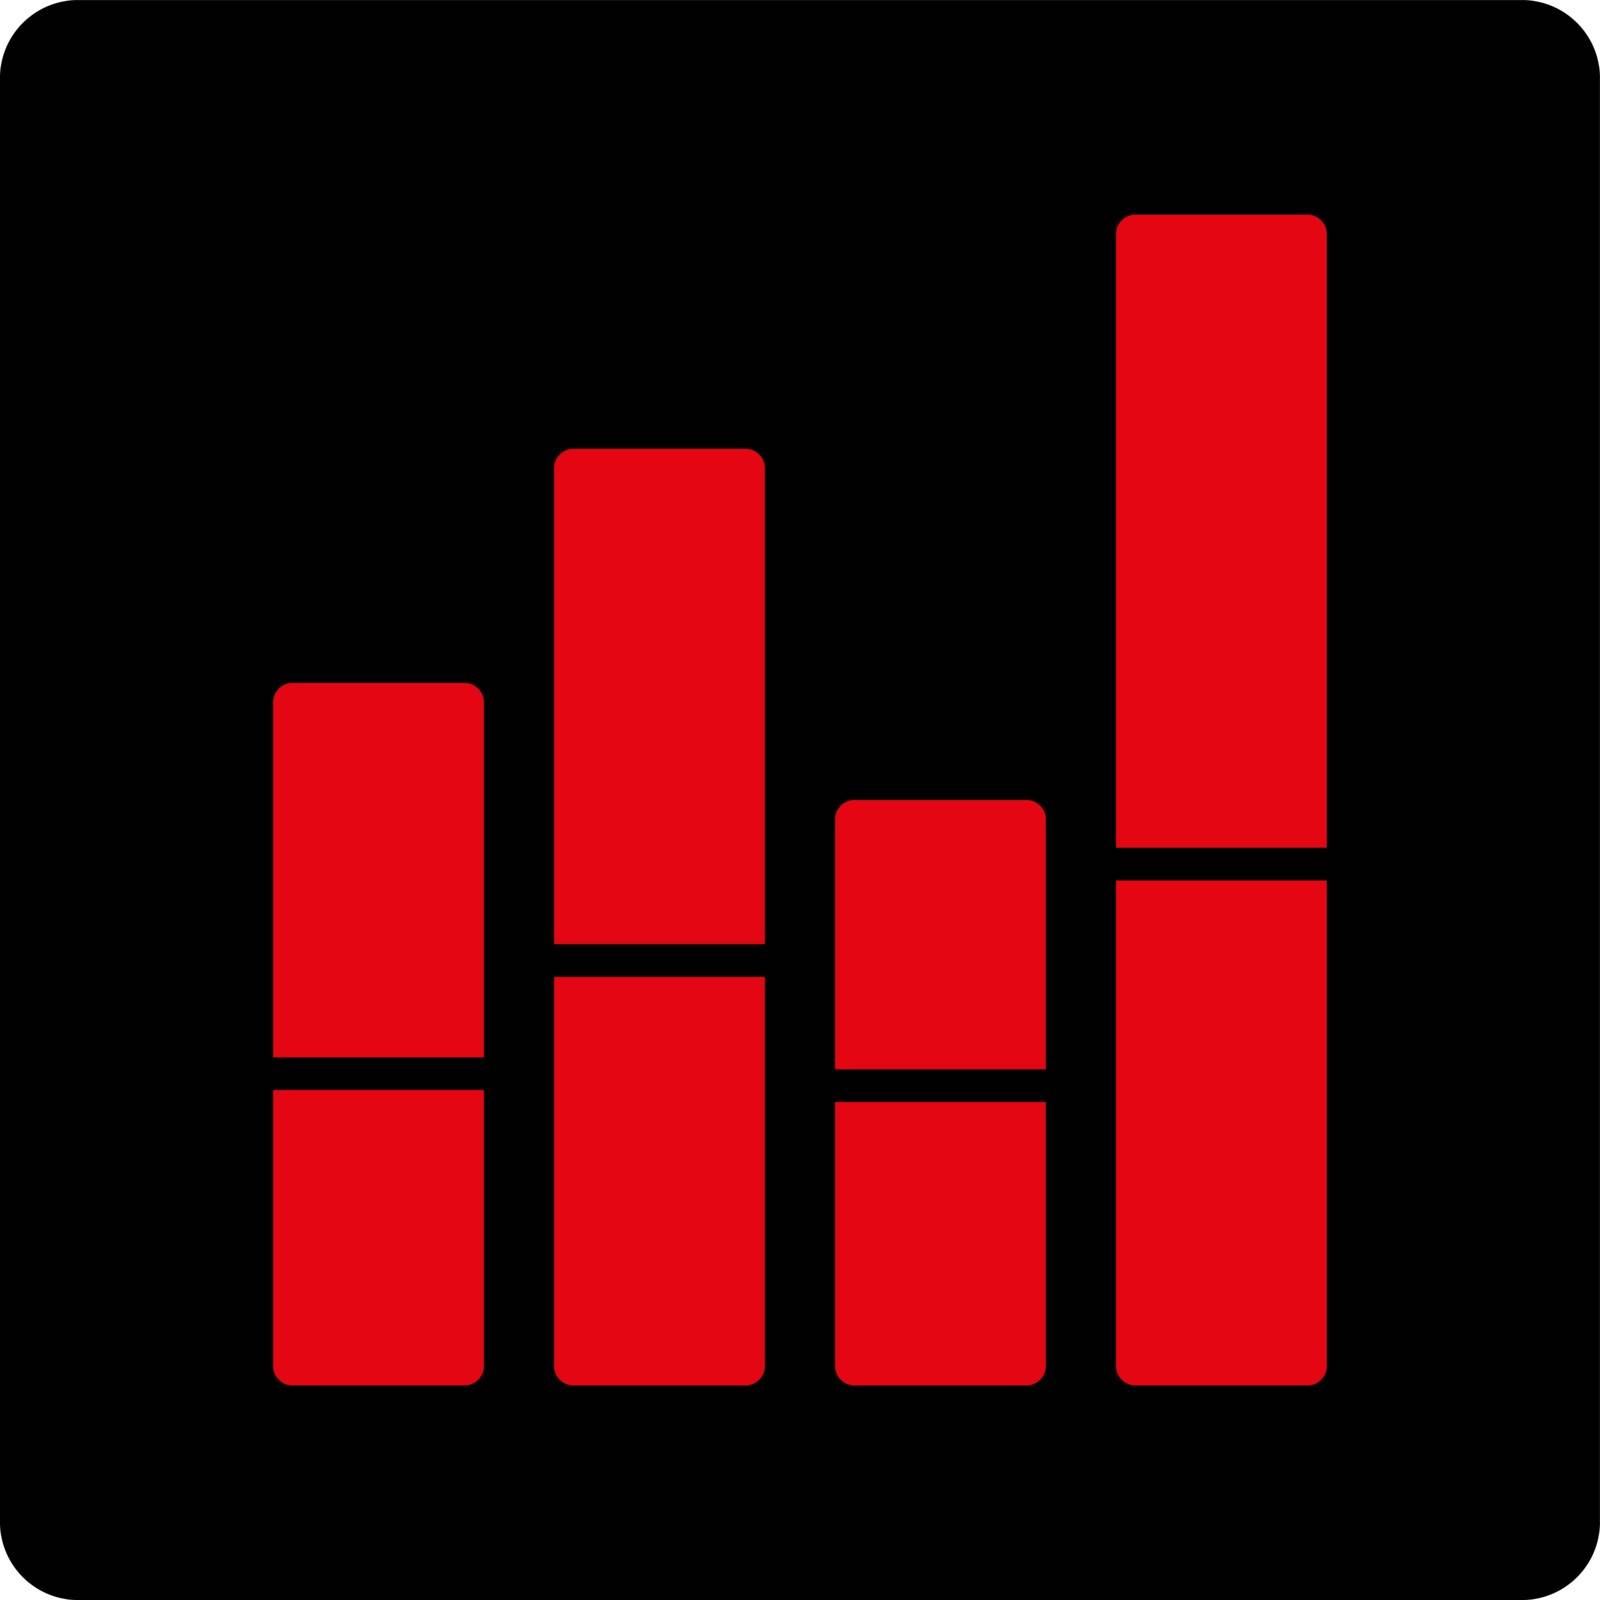 Bar Chart vector icon. This flat rounded square button uses intensive red and black colors and isolated on a white background.